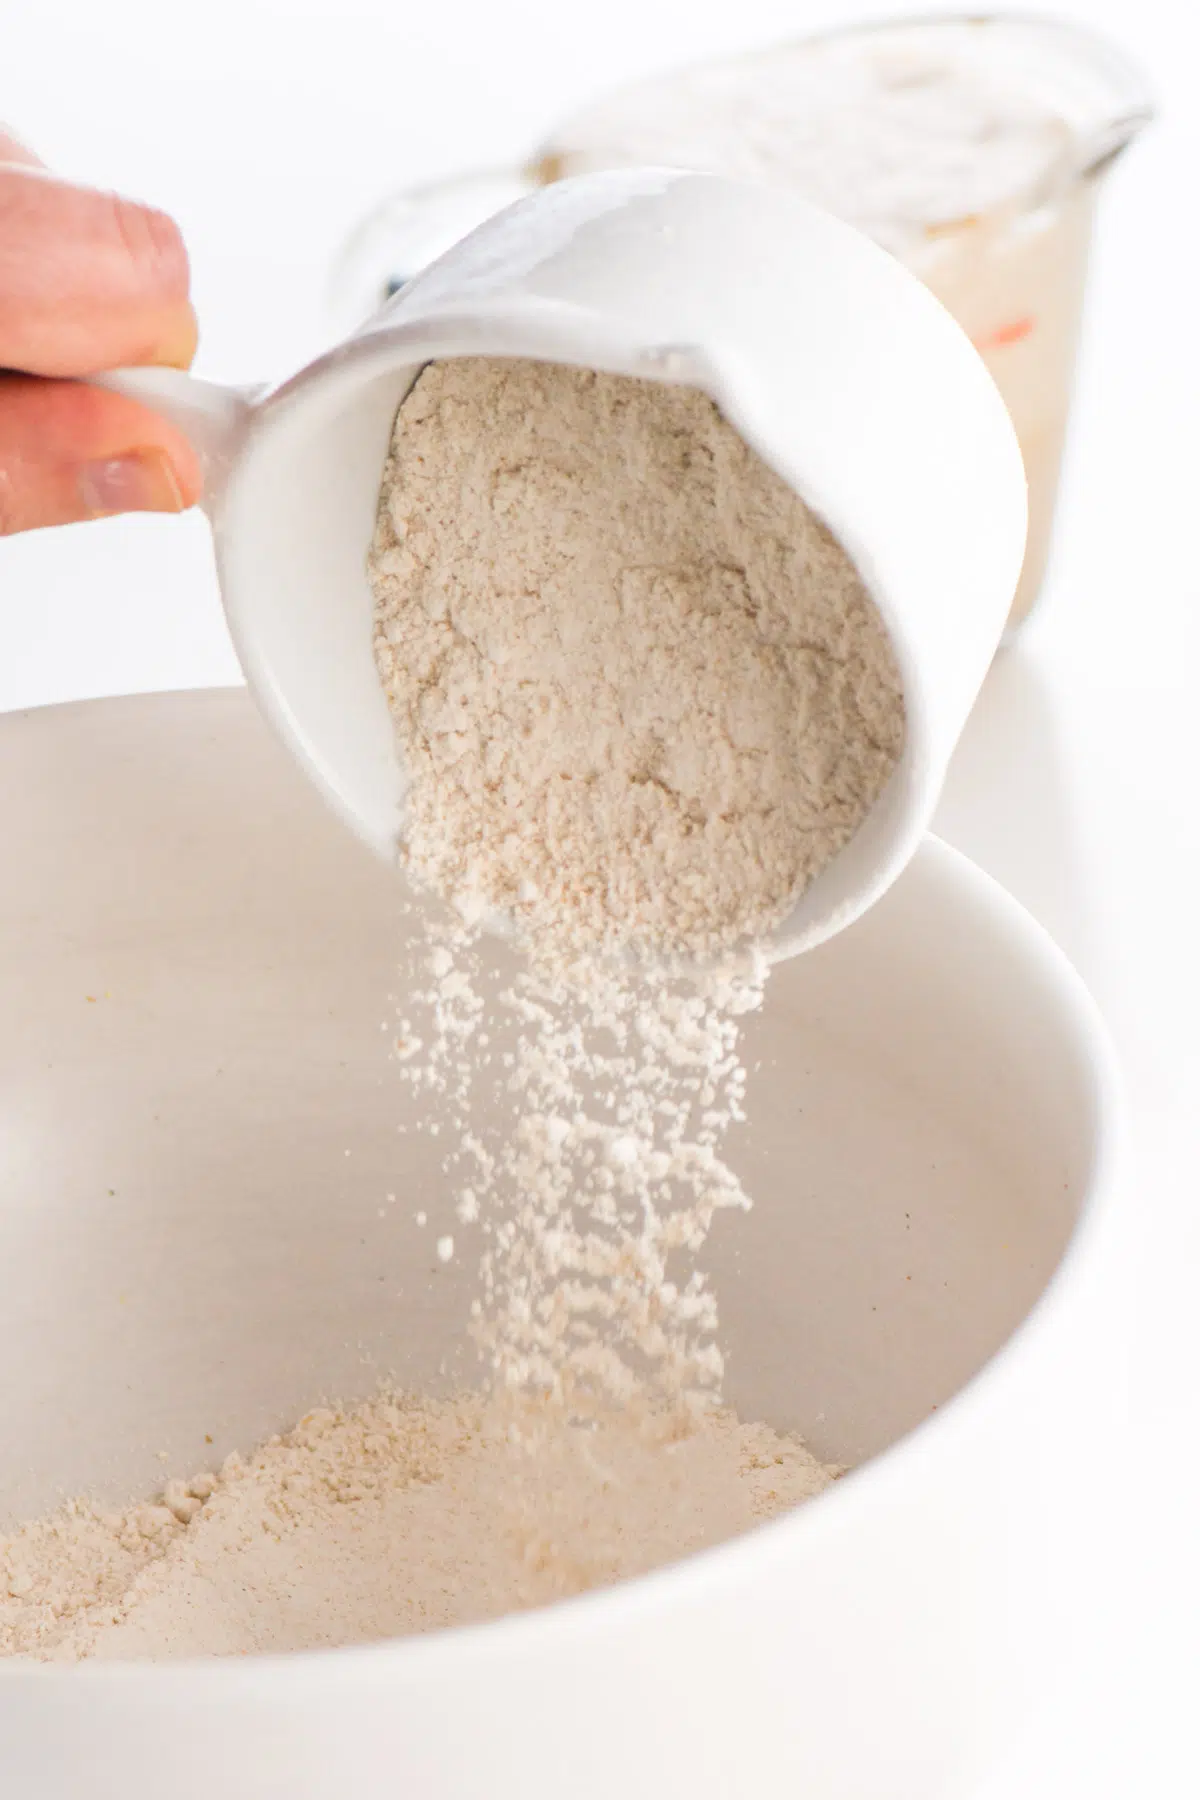 Flour is being poured in a white mixing bowl.